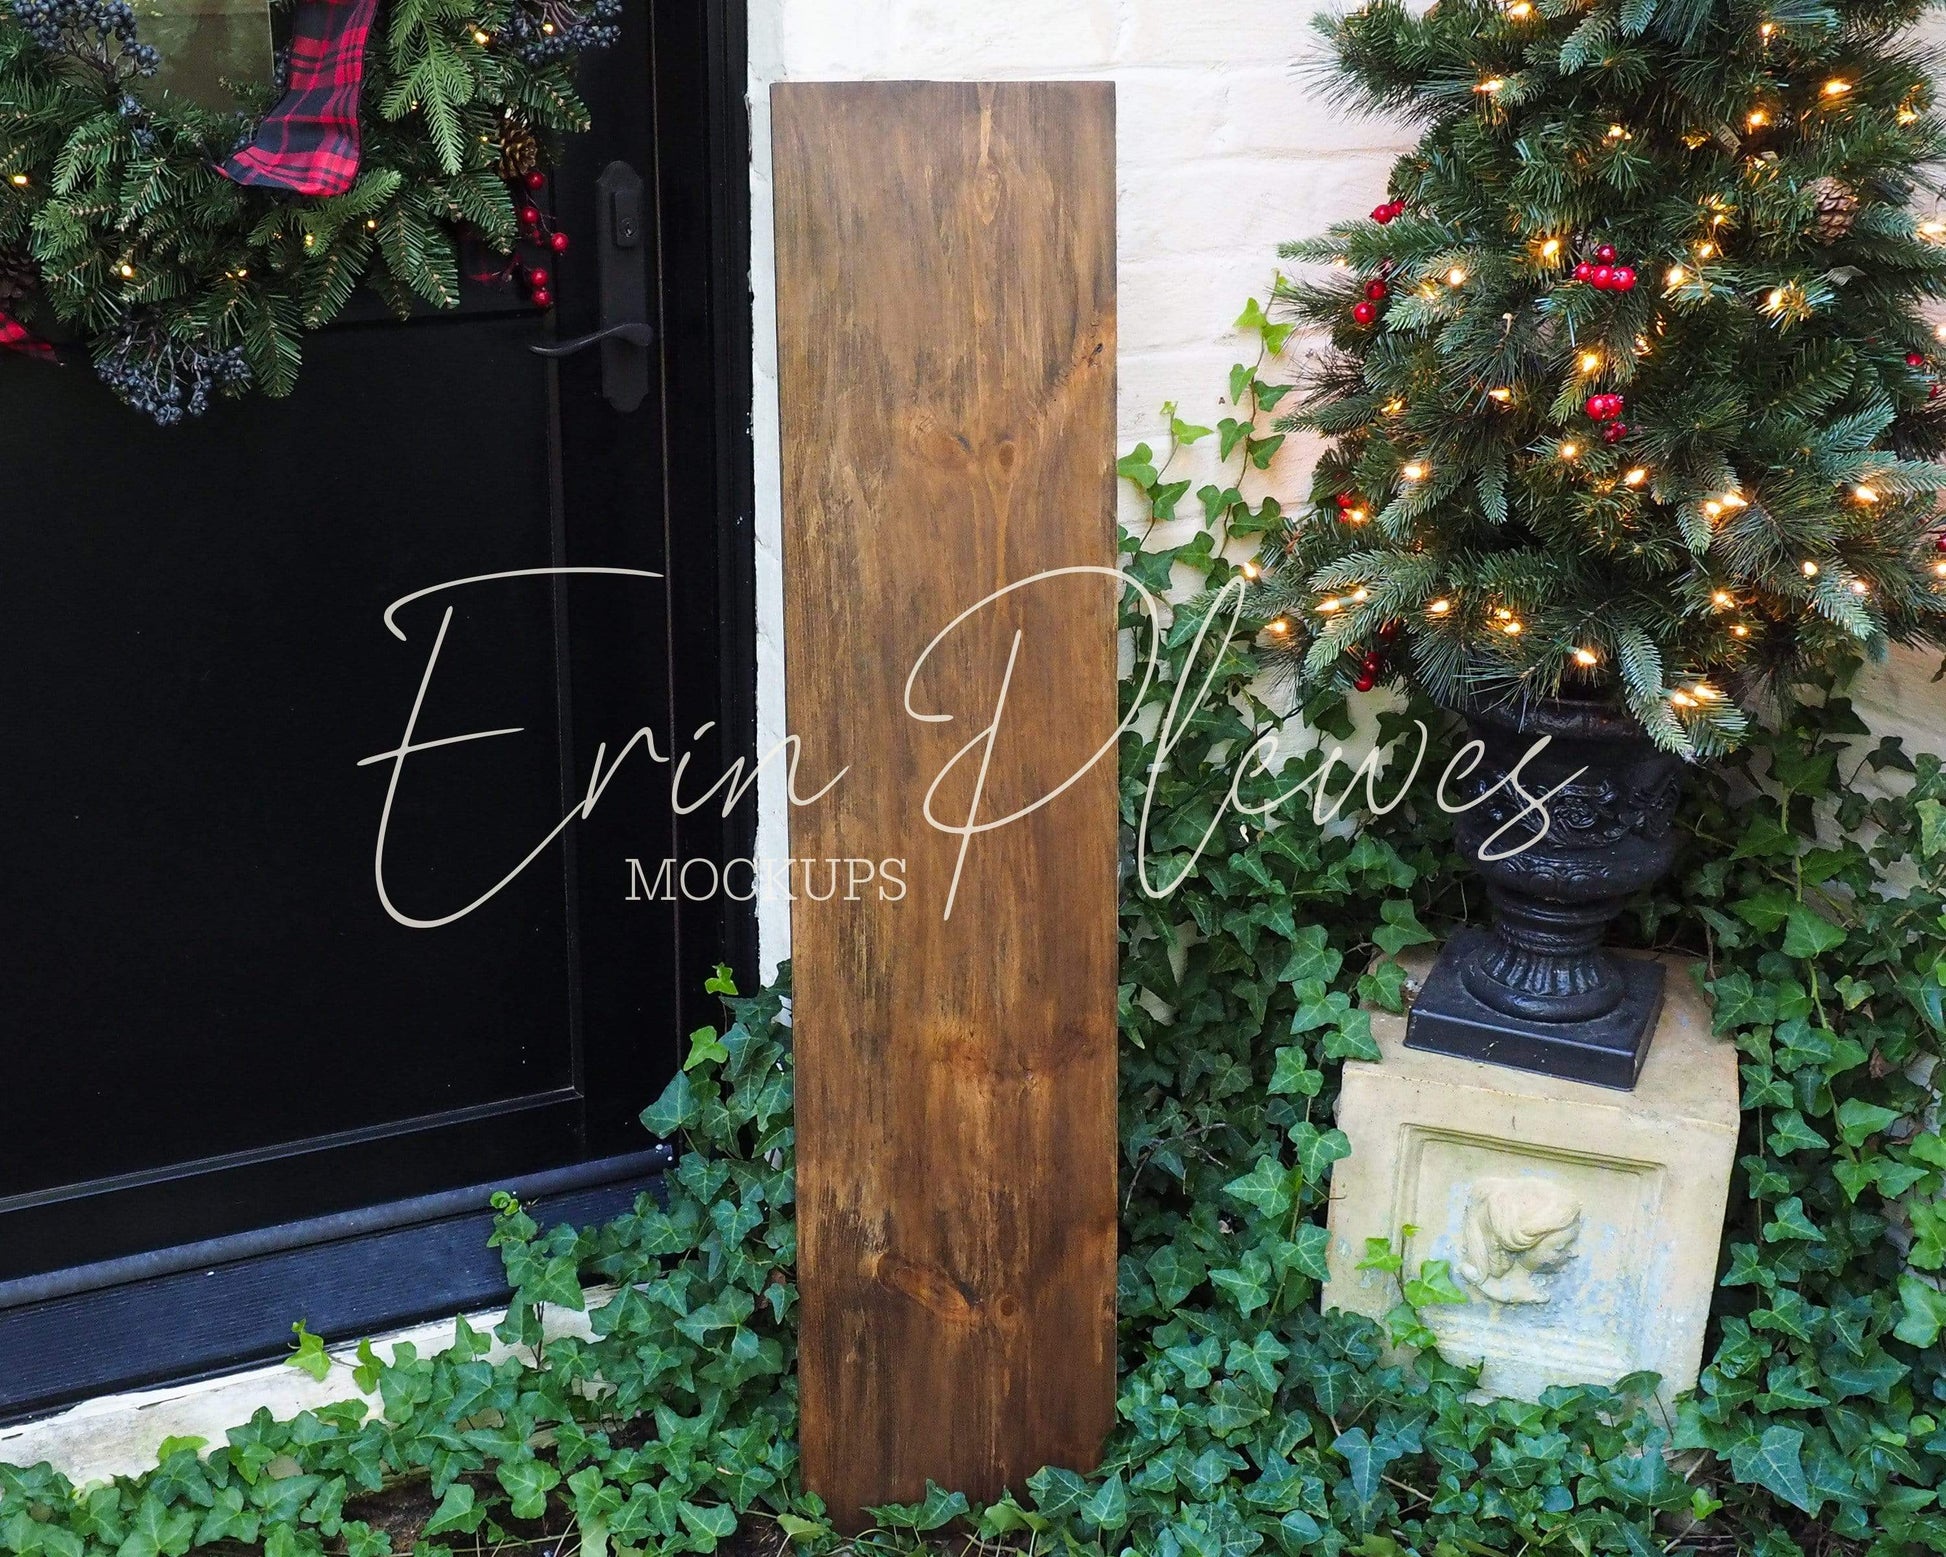 Erin Plewes Mockups Porch Sign Mockup, Christmas Vertical Sign Mock Up, Outdoor Wood Frame Mock-up 12" x 48", Xmas Farmhouse Style Template